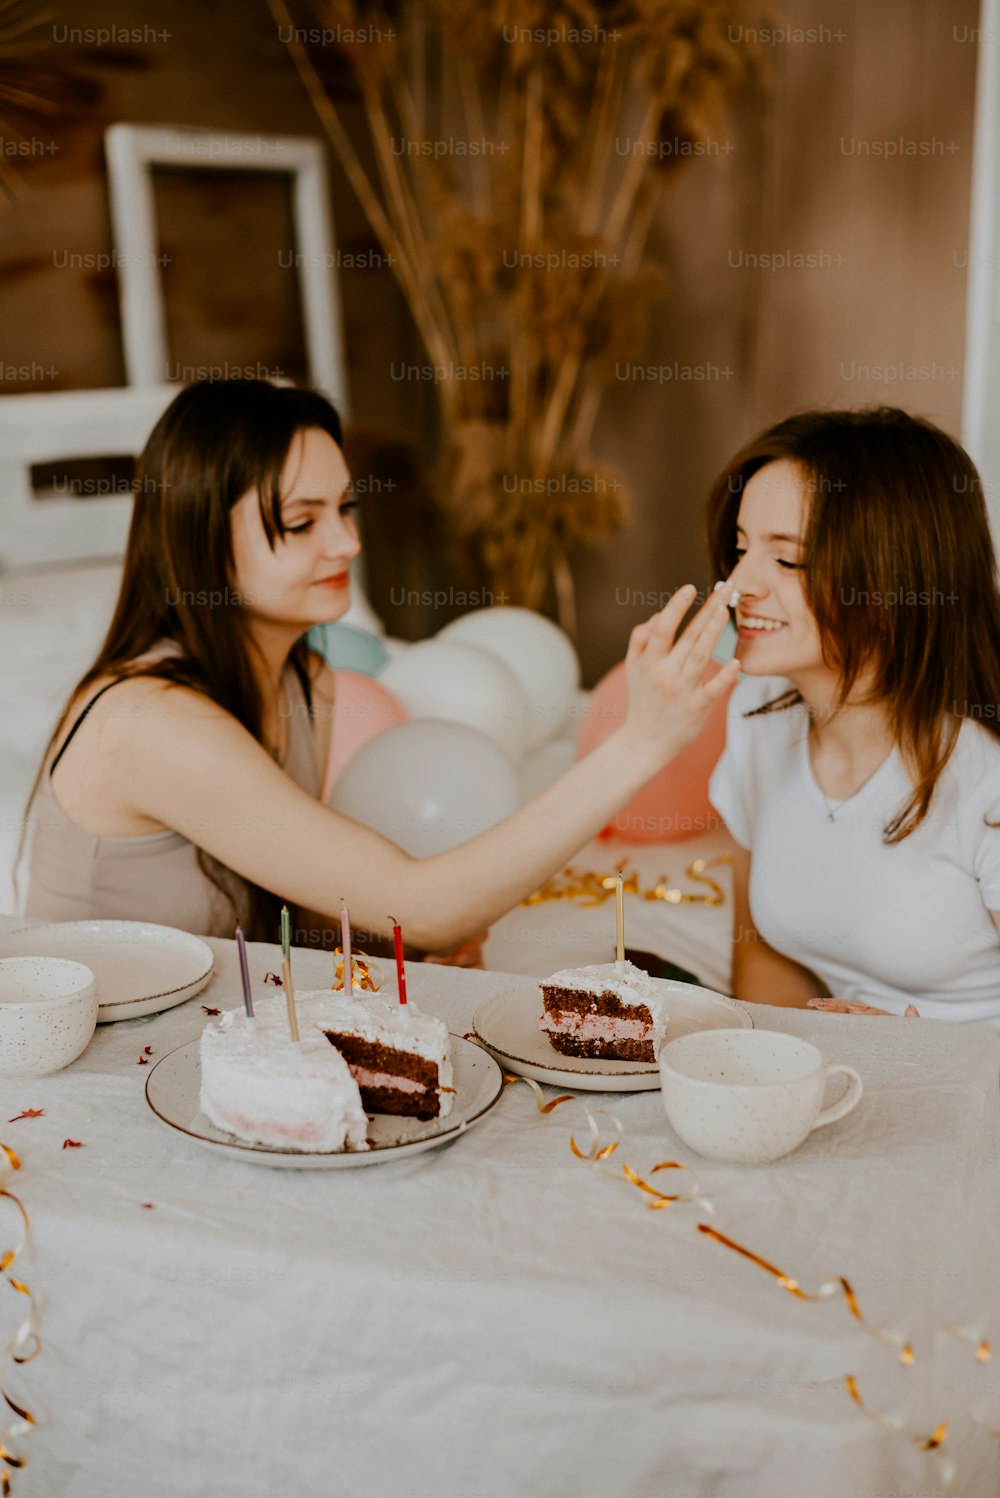 two women sitting at a table eating cake